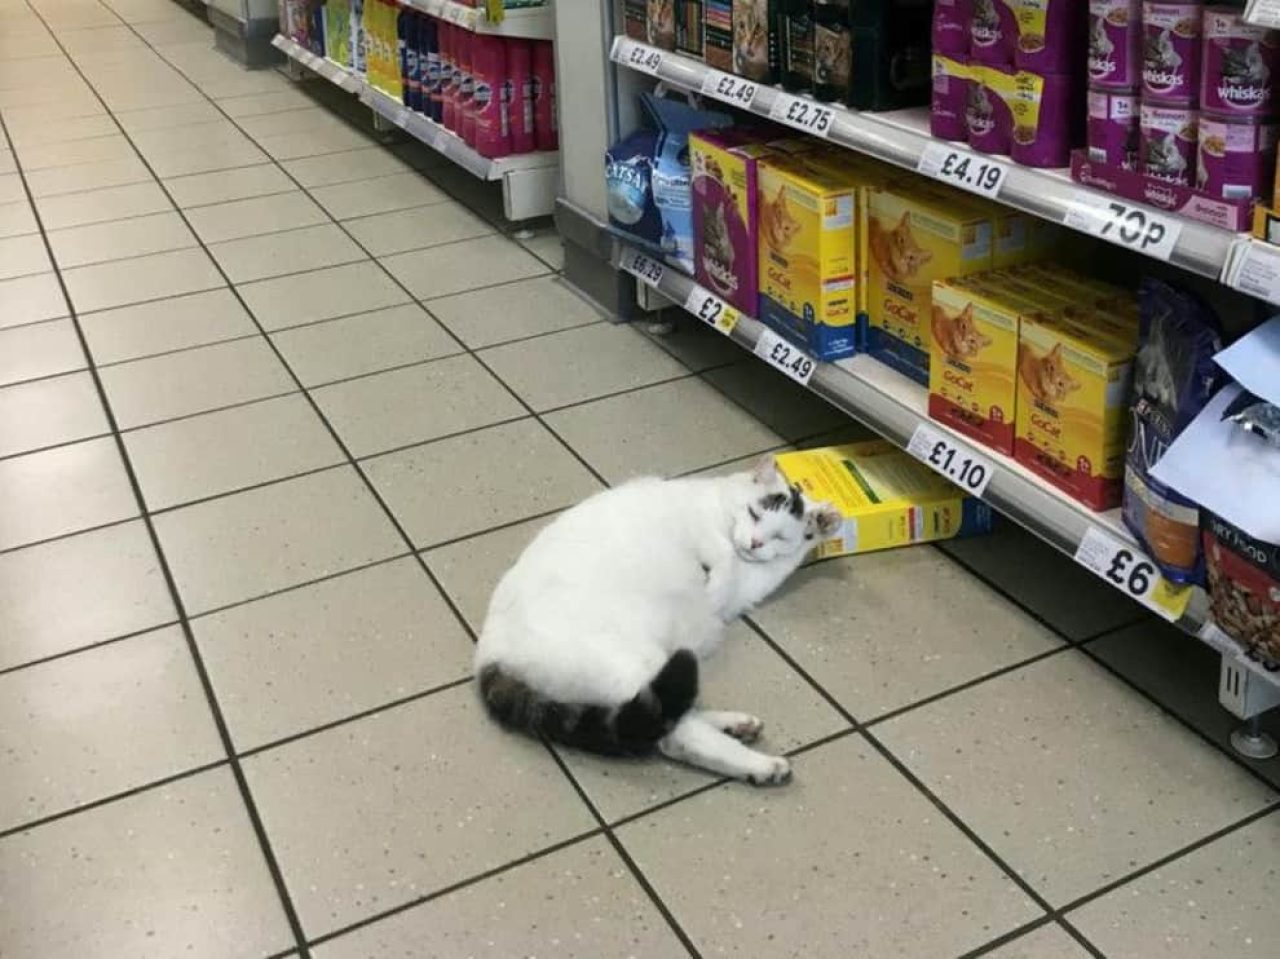 Cat-Life At Its Best: This Cute Kitty Walks Into Tesco To Grab Some Biscuits And Take A Nap